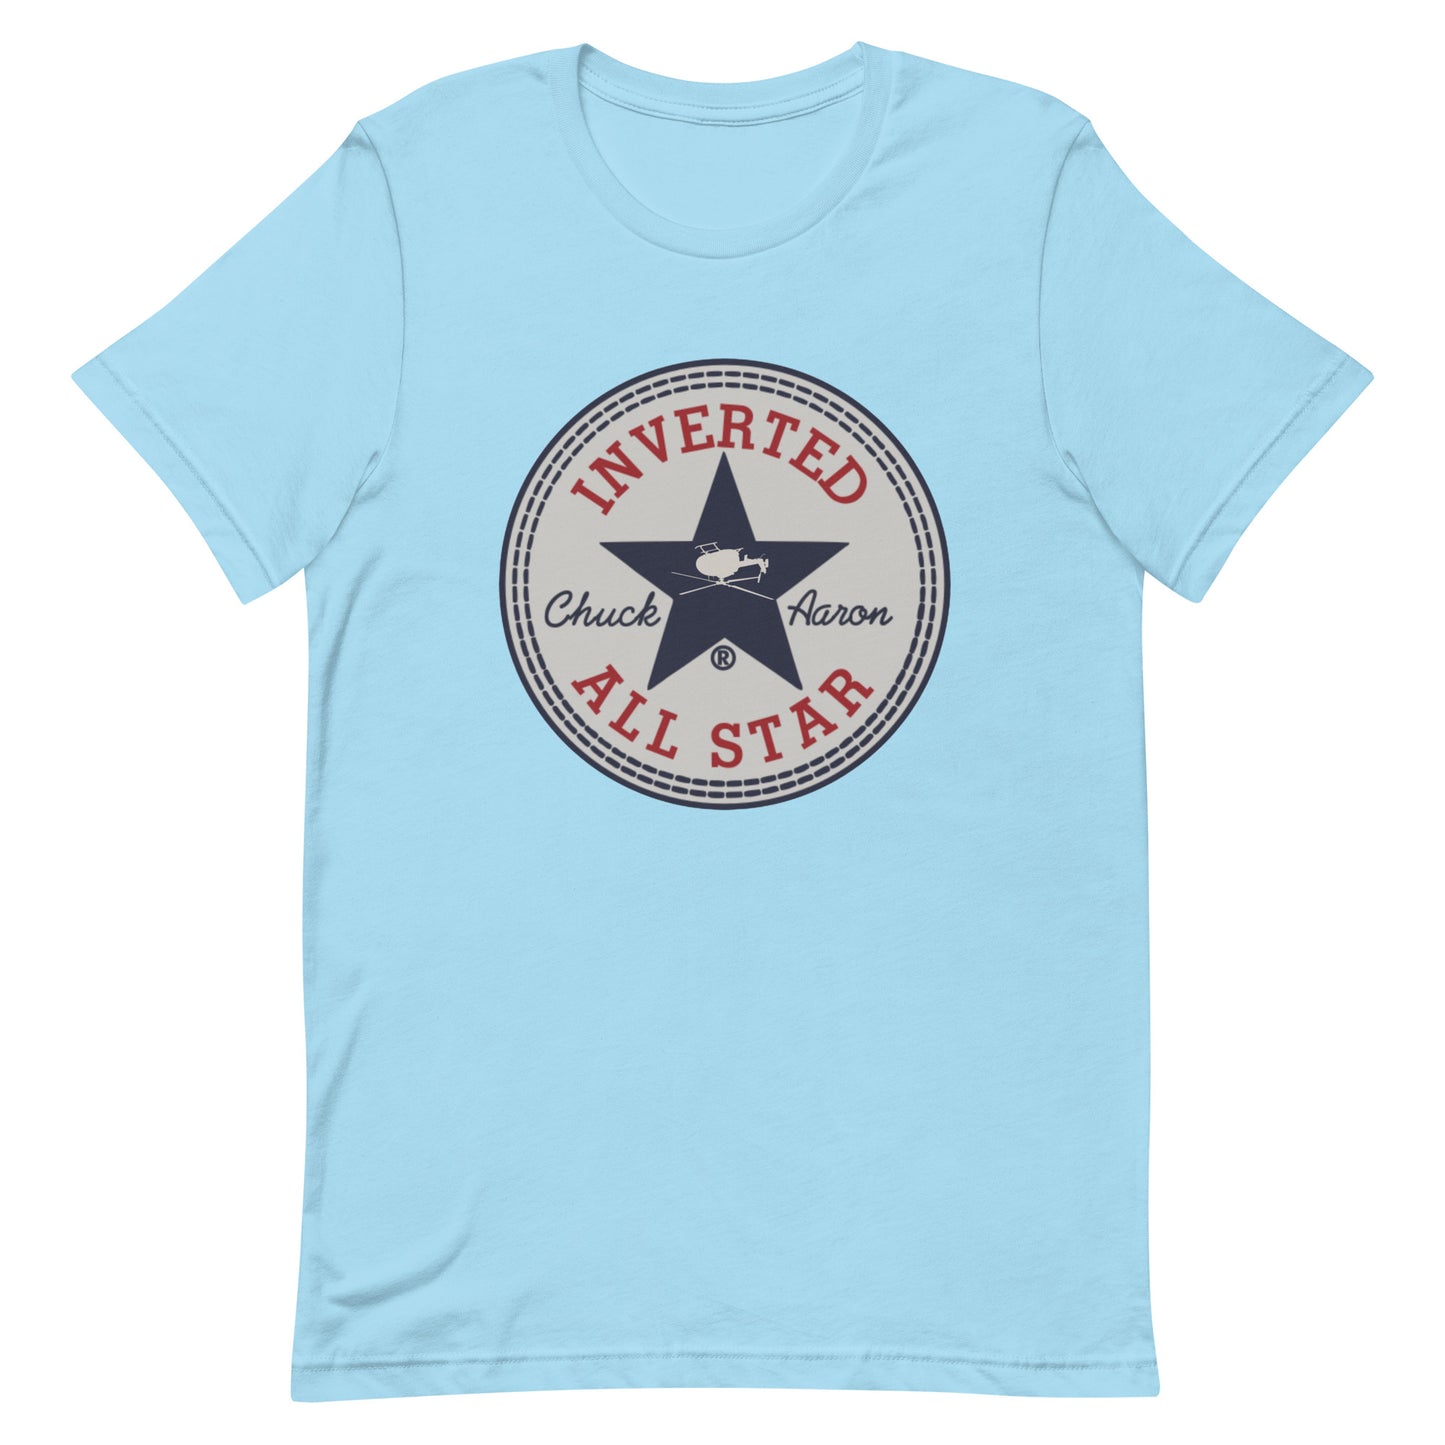 Inverted All-Star Tee